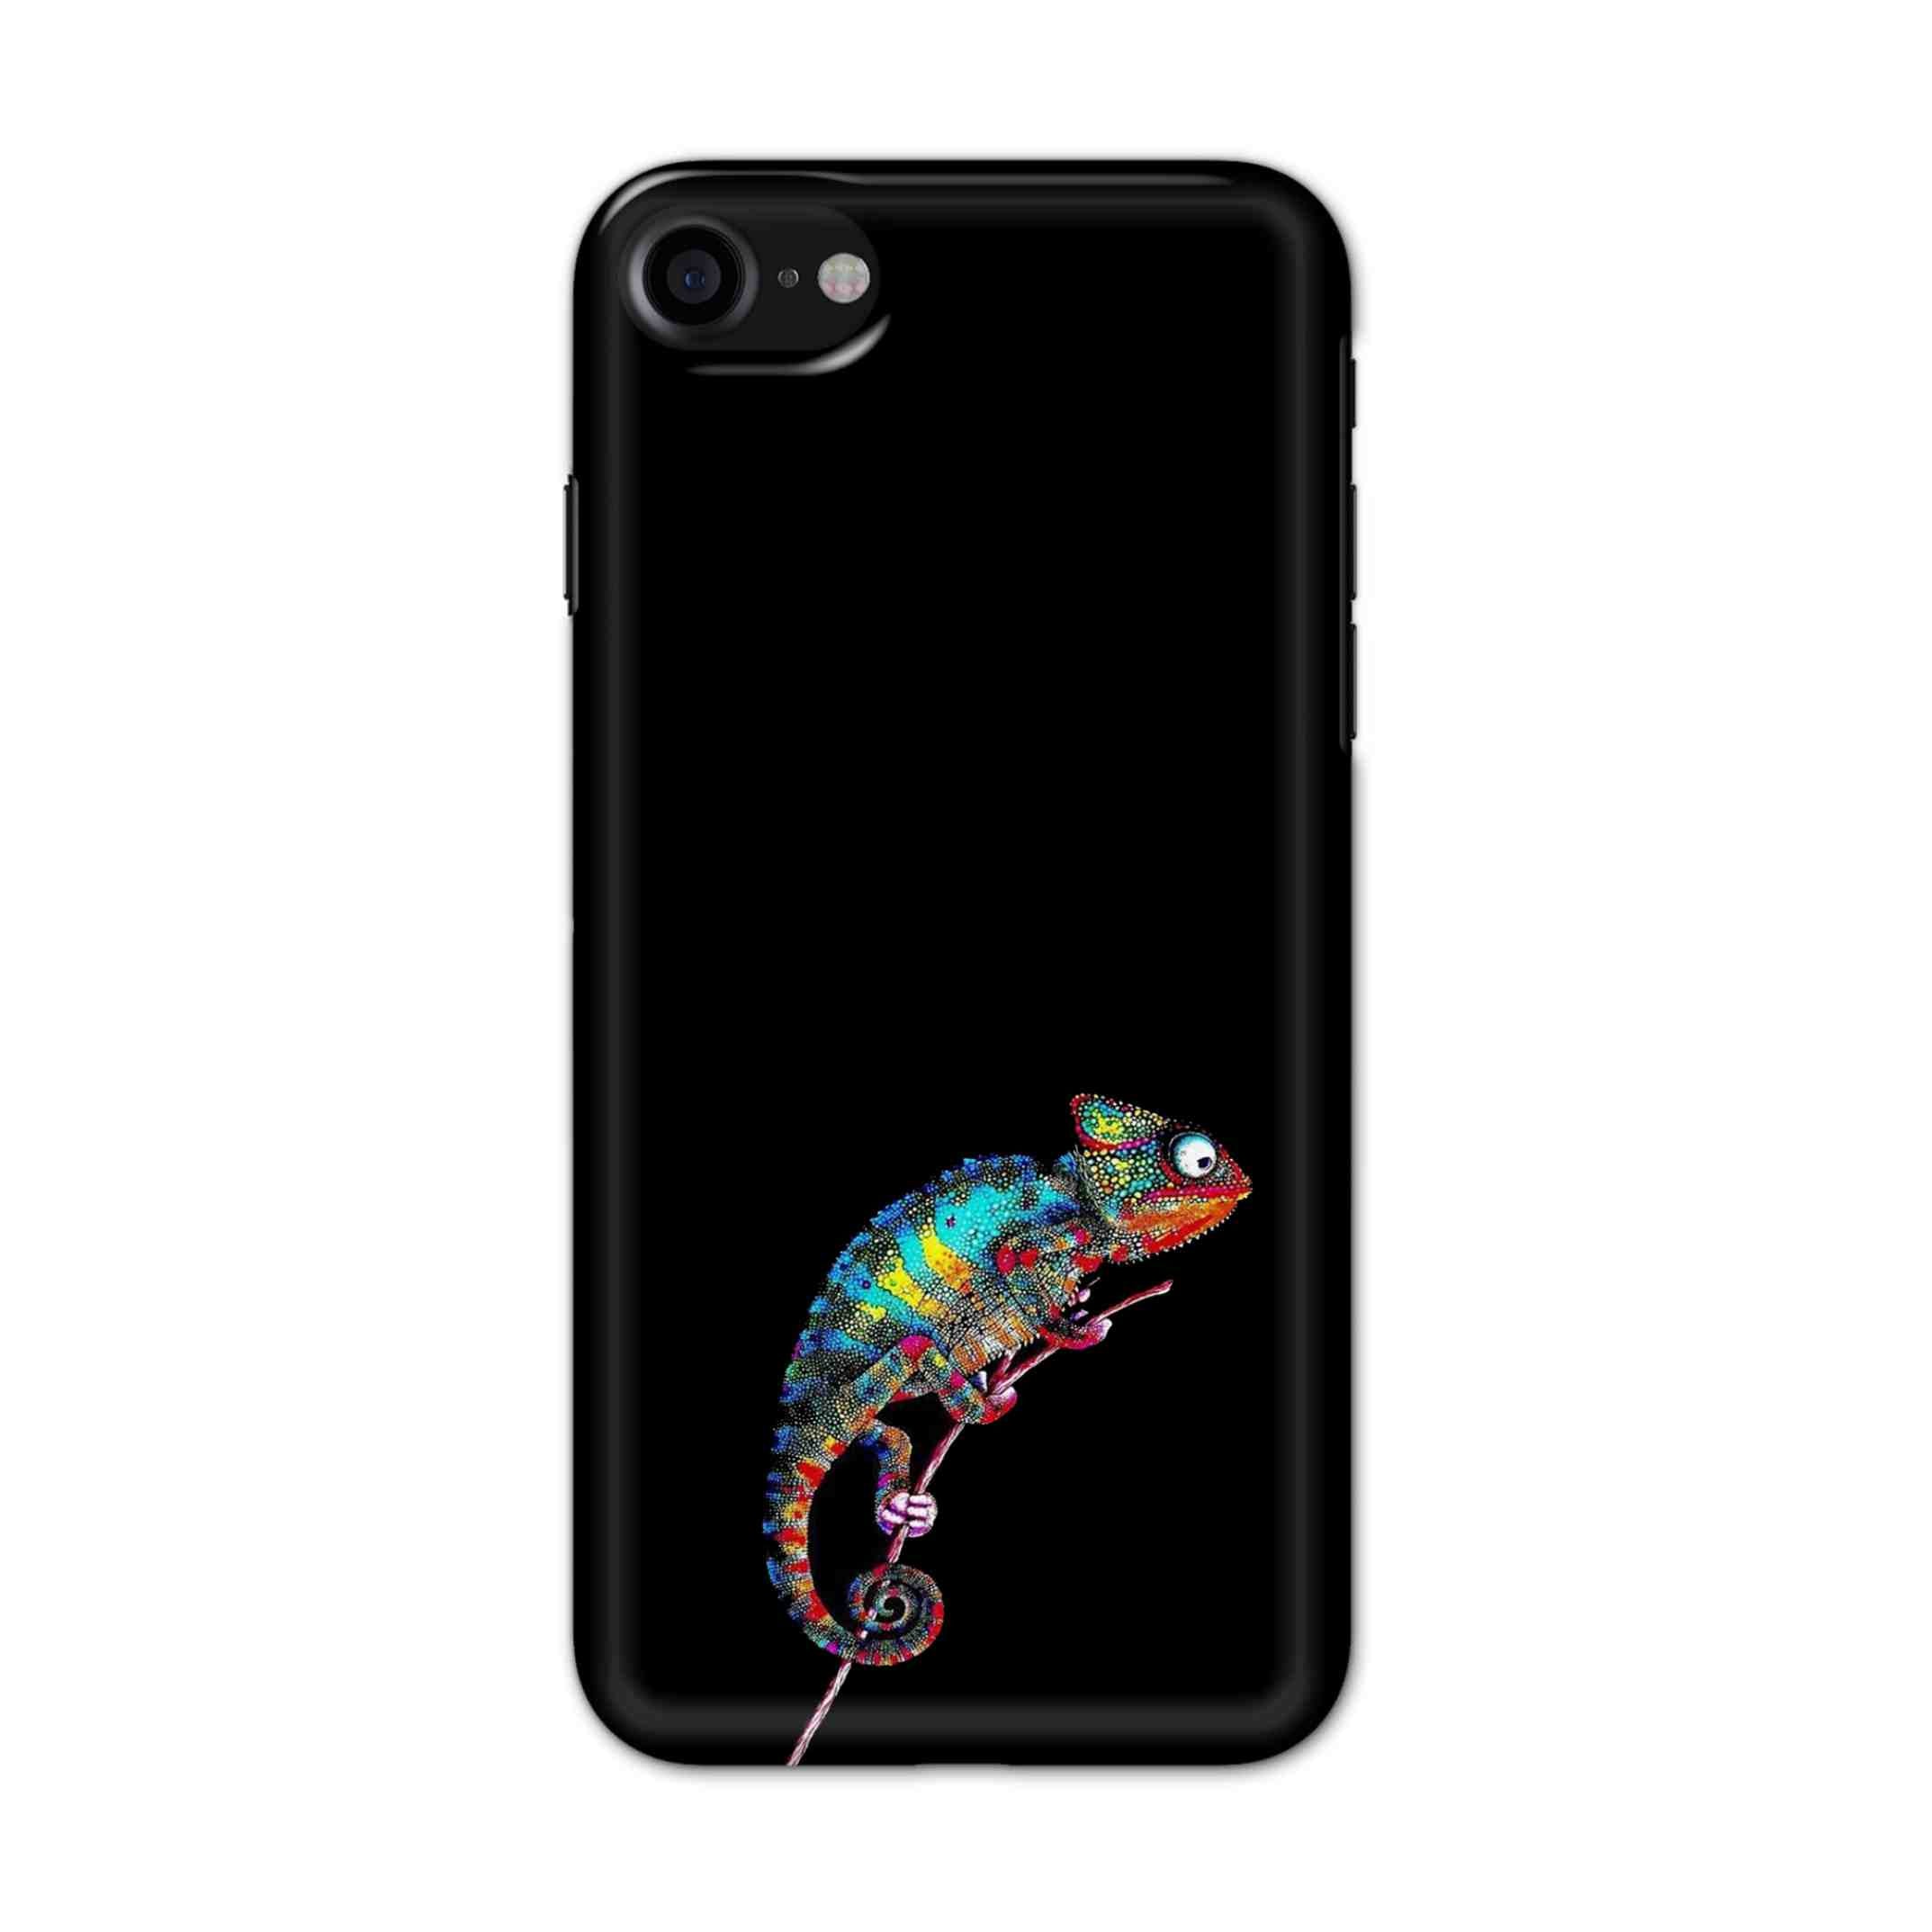 Buy Chamaeleon Hard Back Mobile Phone Case/Cover For iPhone 7 / 8 Online